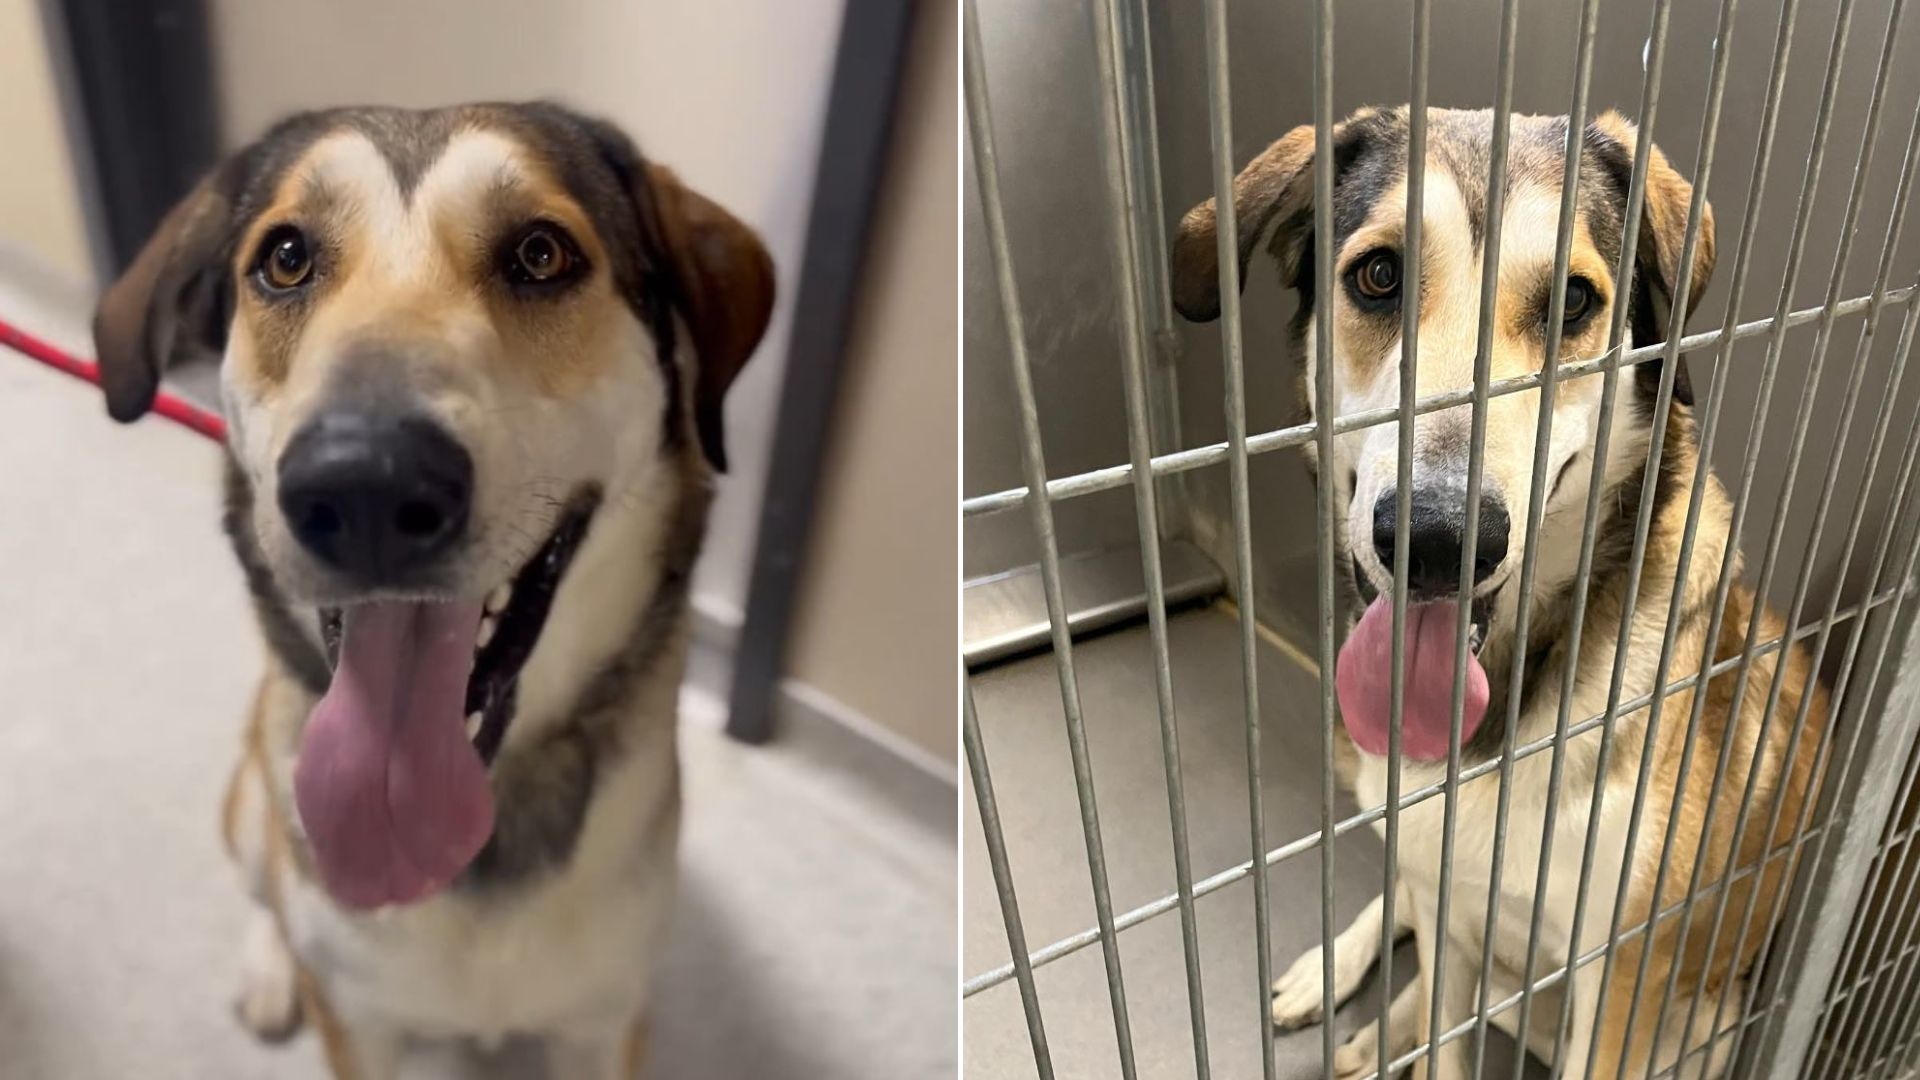 Shelter Dog Returned Only An Hour After Being Adopted Because ‘He Is Too Big’